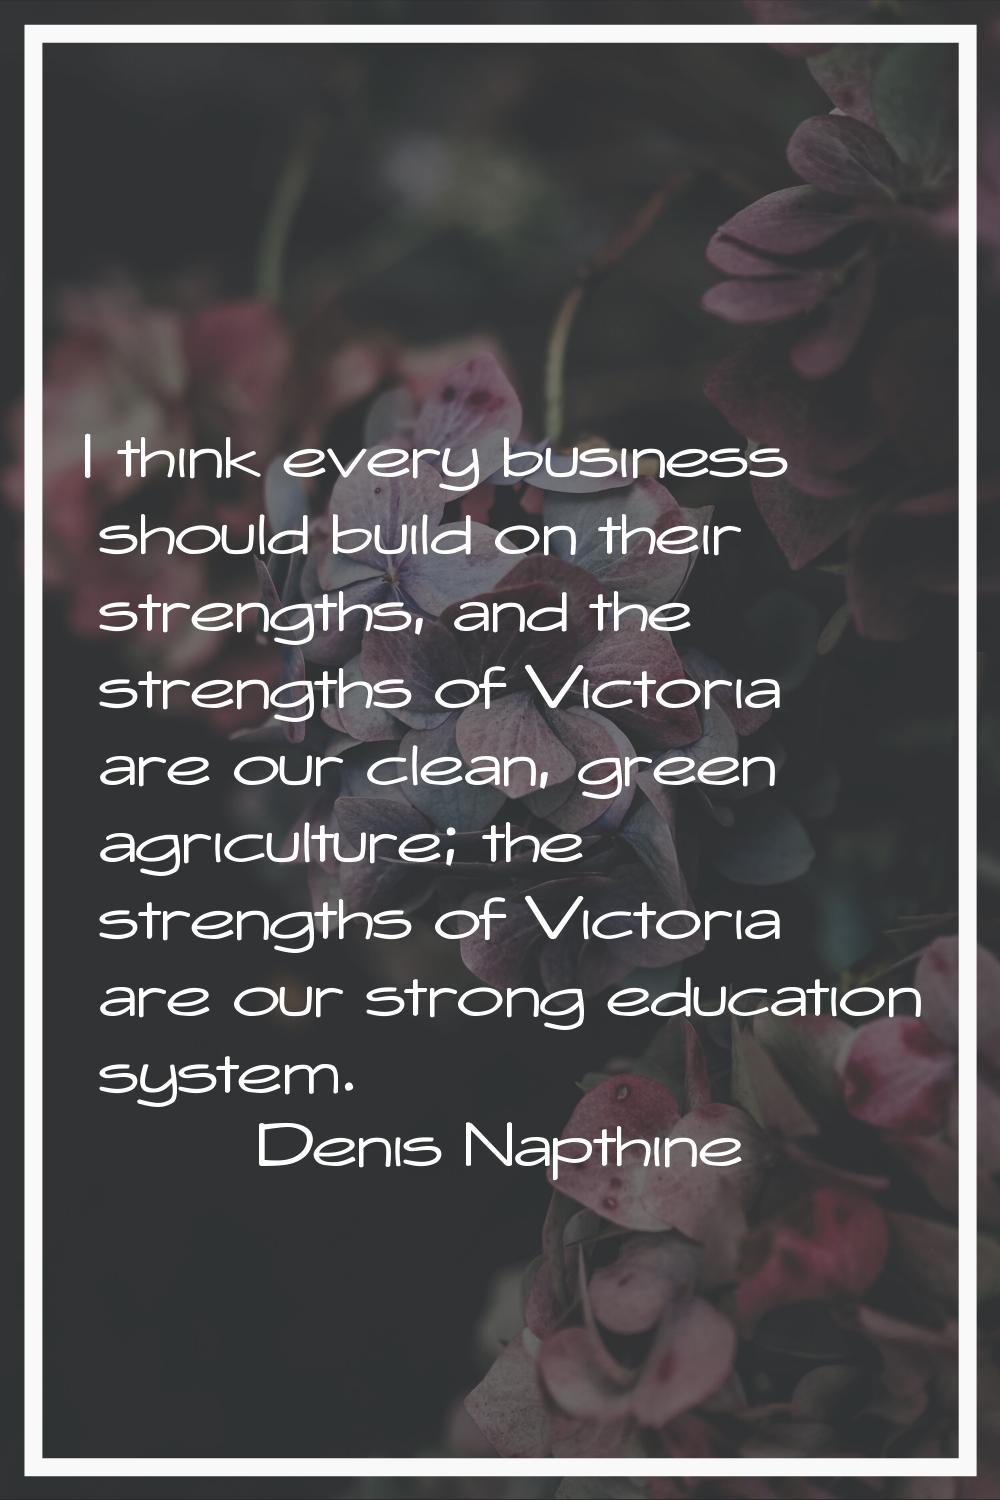 I think every business should build on their strengths, and the strengths of Victoria are our clean